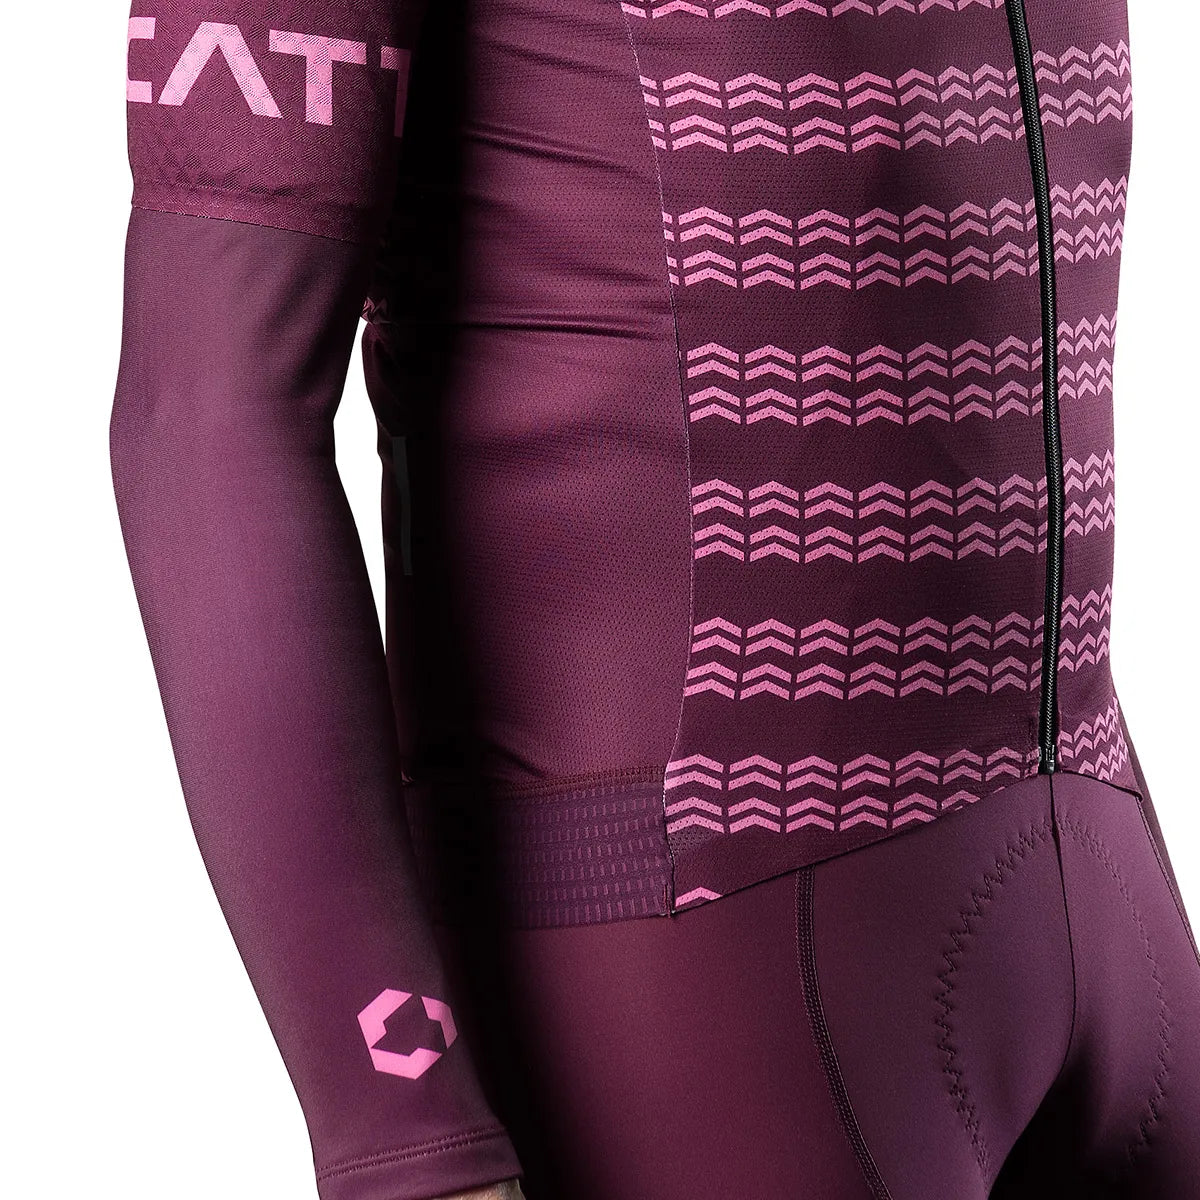 CAT1 Arm Warmers - WAVE